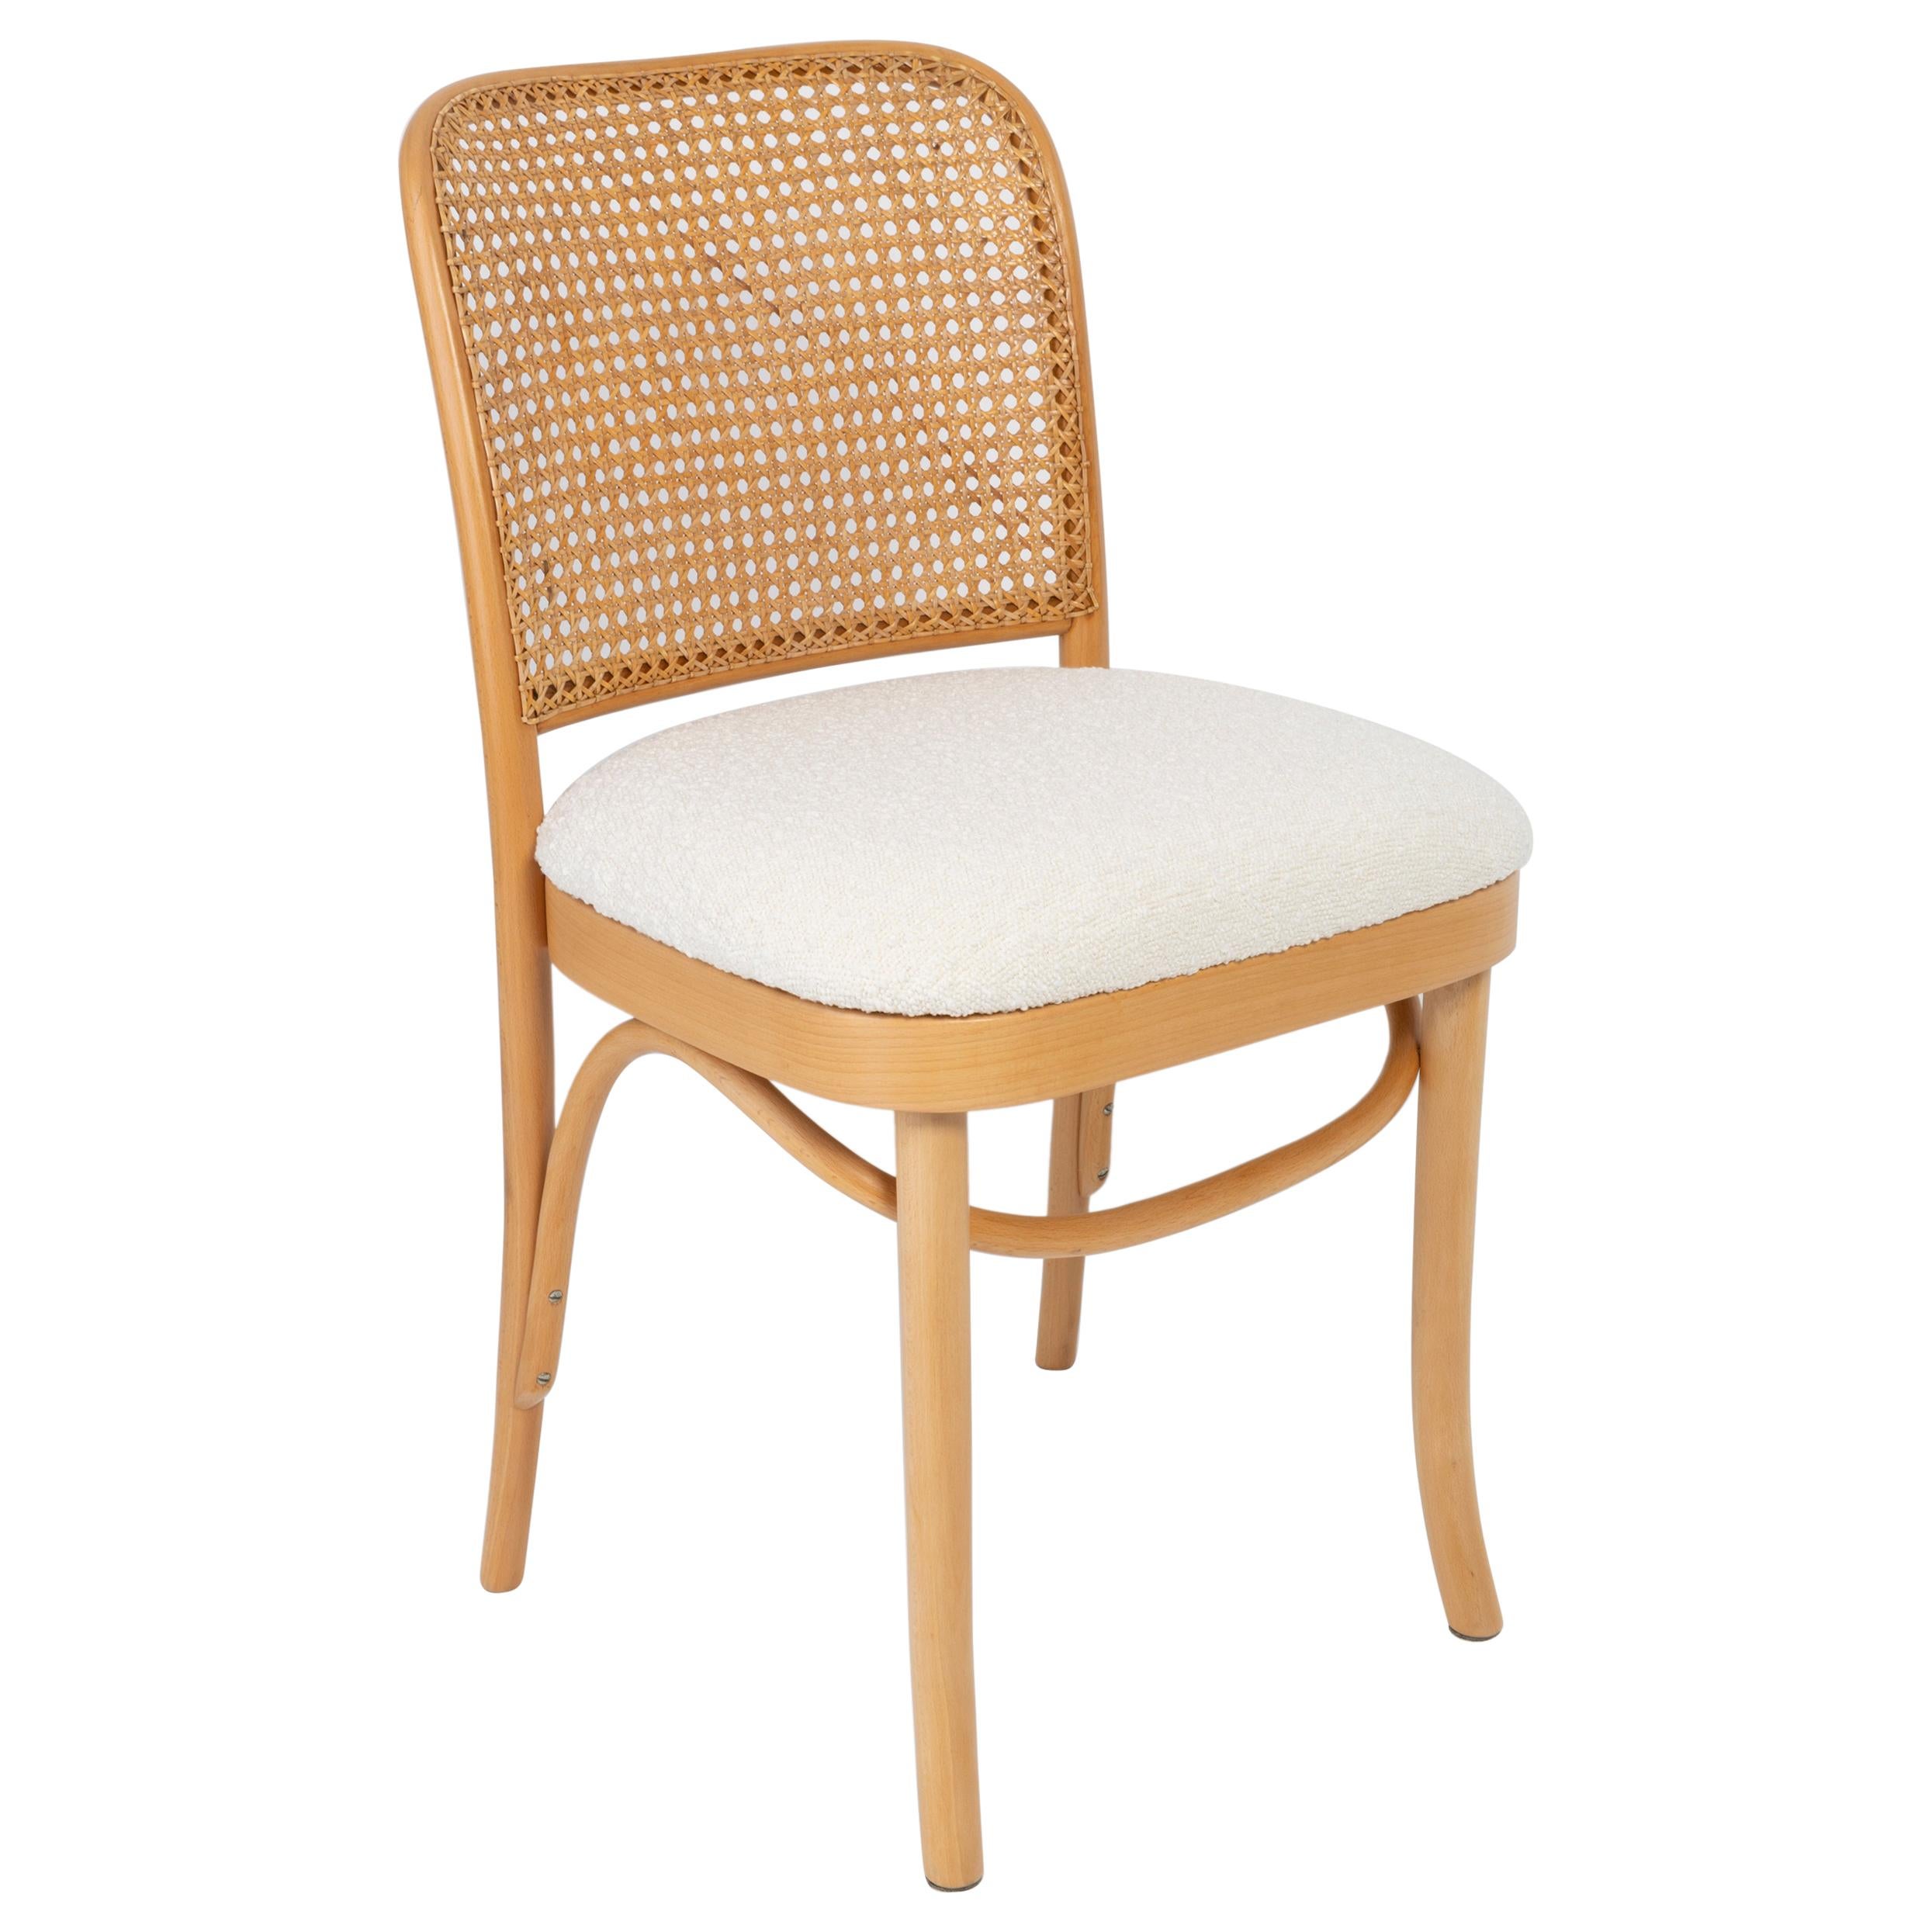 Light White Boucle Thonet Wood Rattan Chair, 1960s For Sale